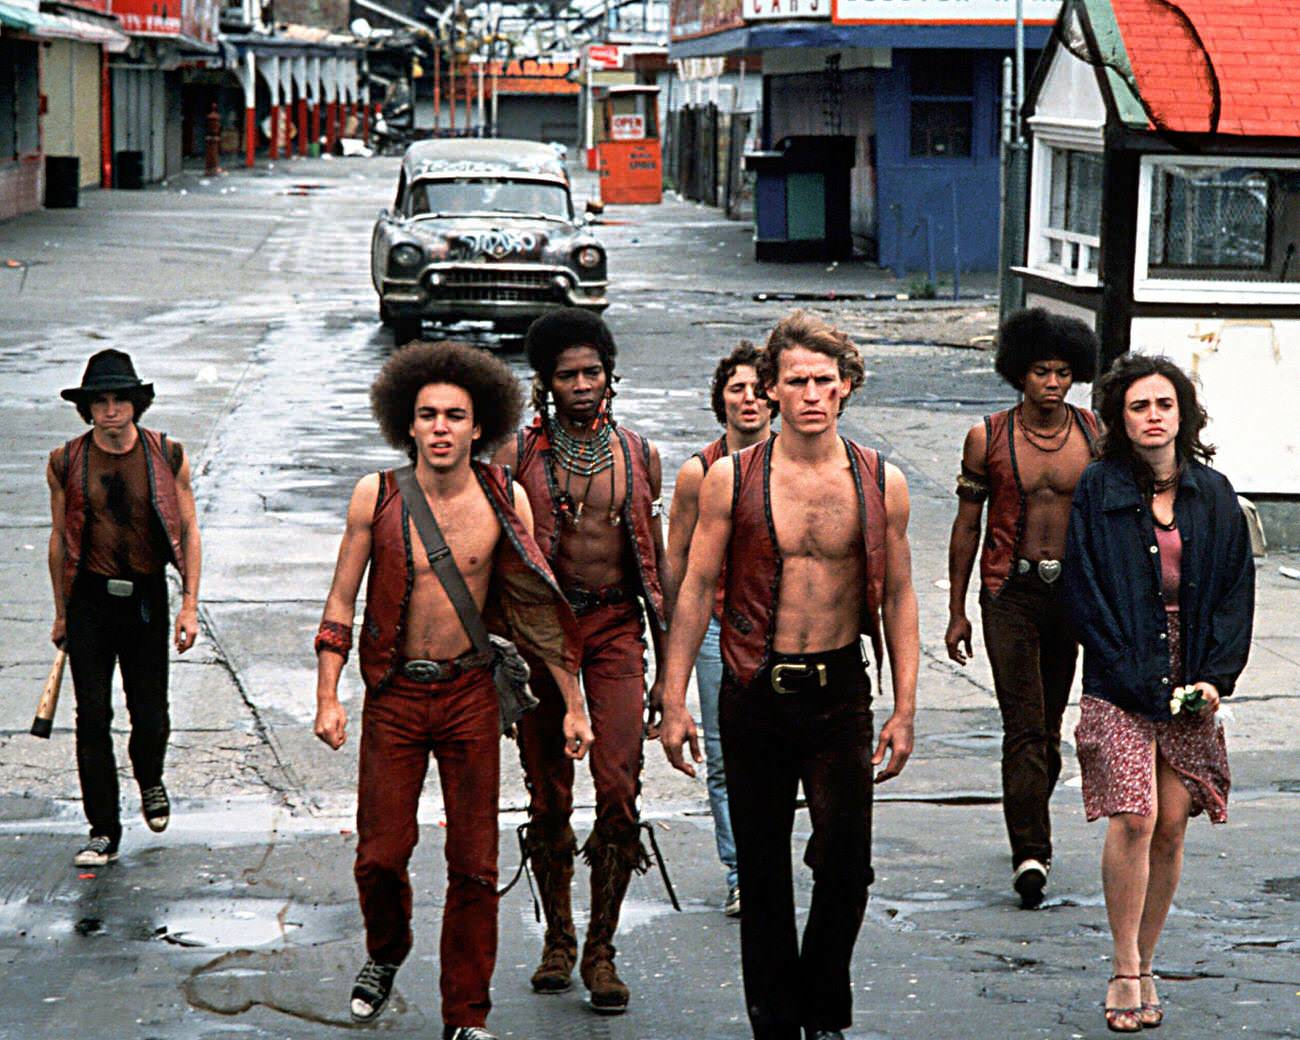 Scene From 'The Warriors' With The Gang Walking Along Bowery Street In Coney Island, Brooklyn, 1979